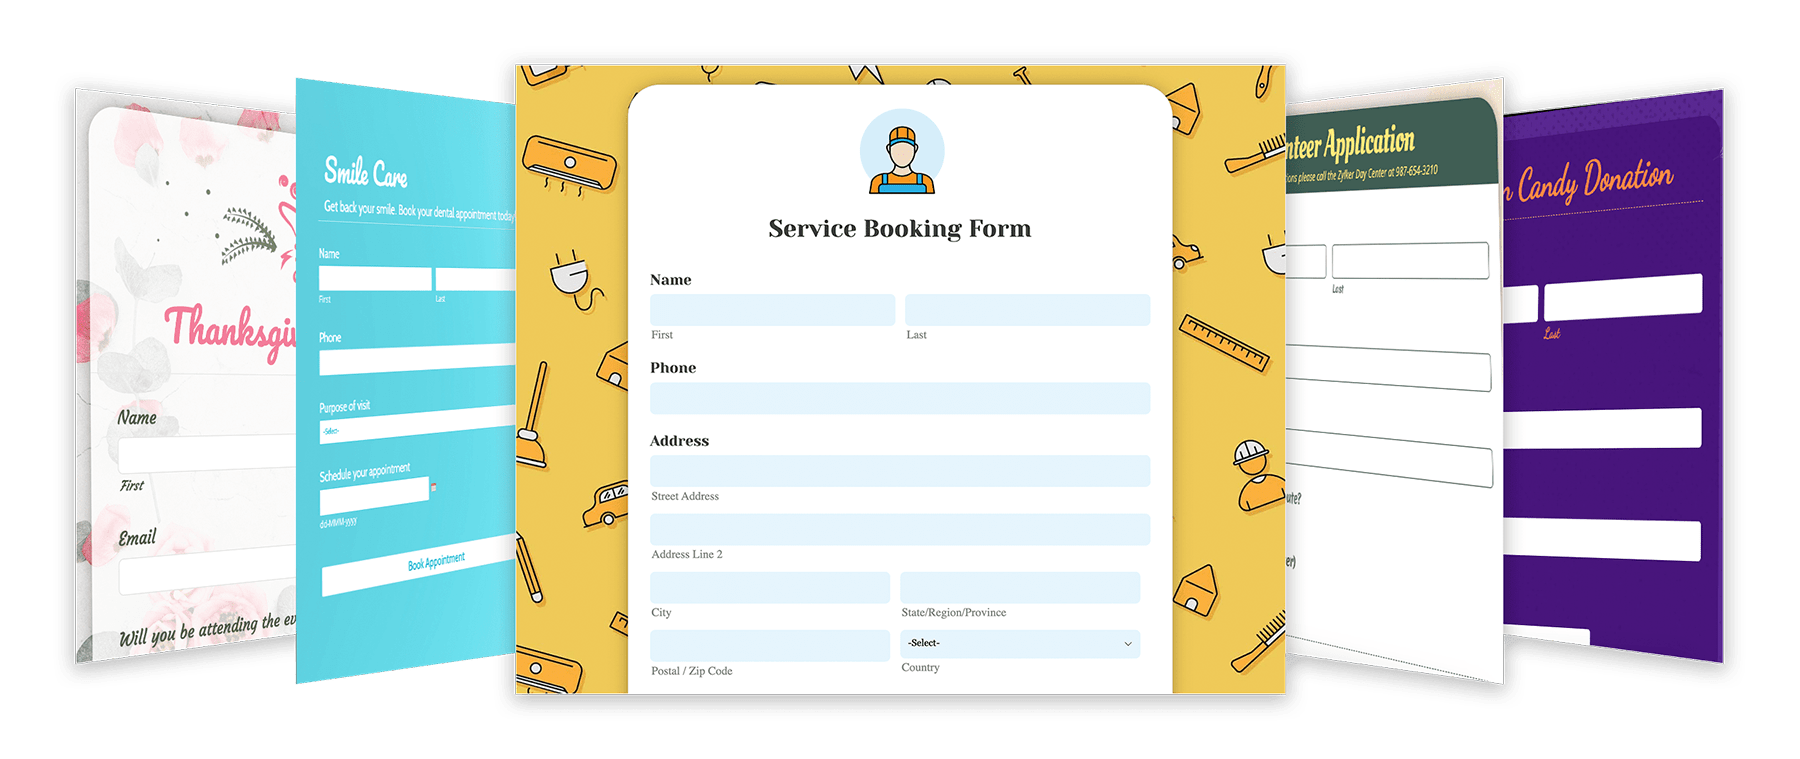 Request Form Templates - Zoho Forms